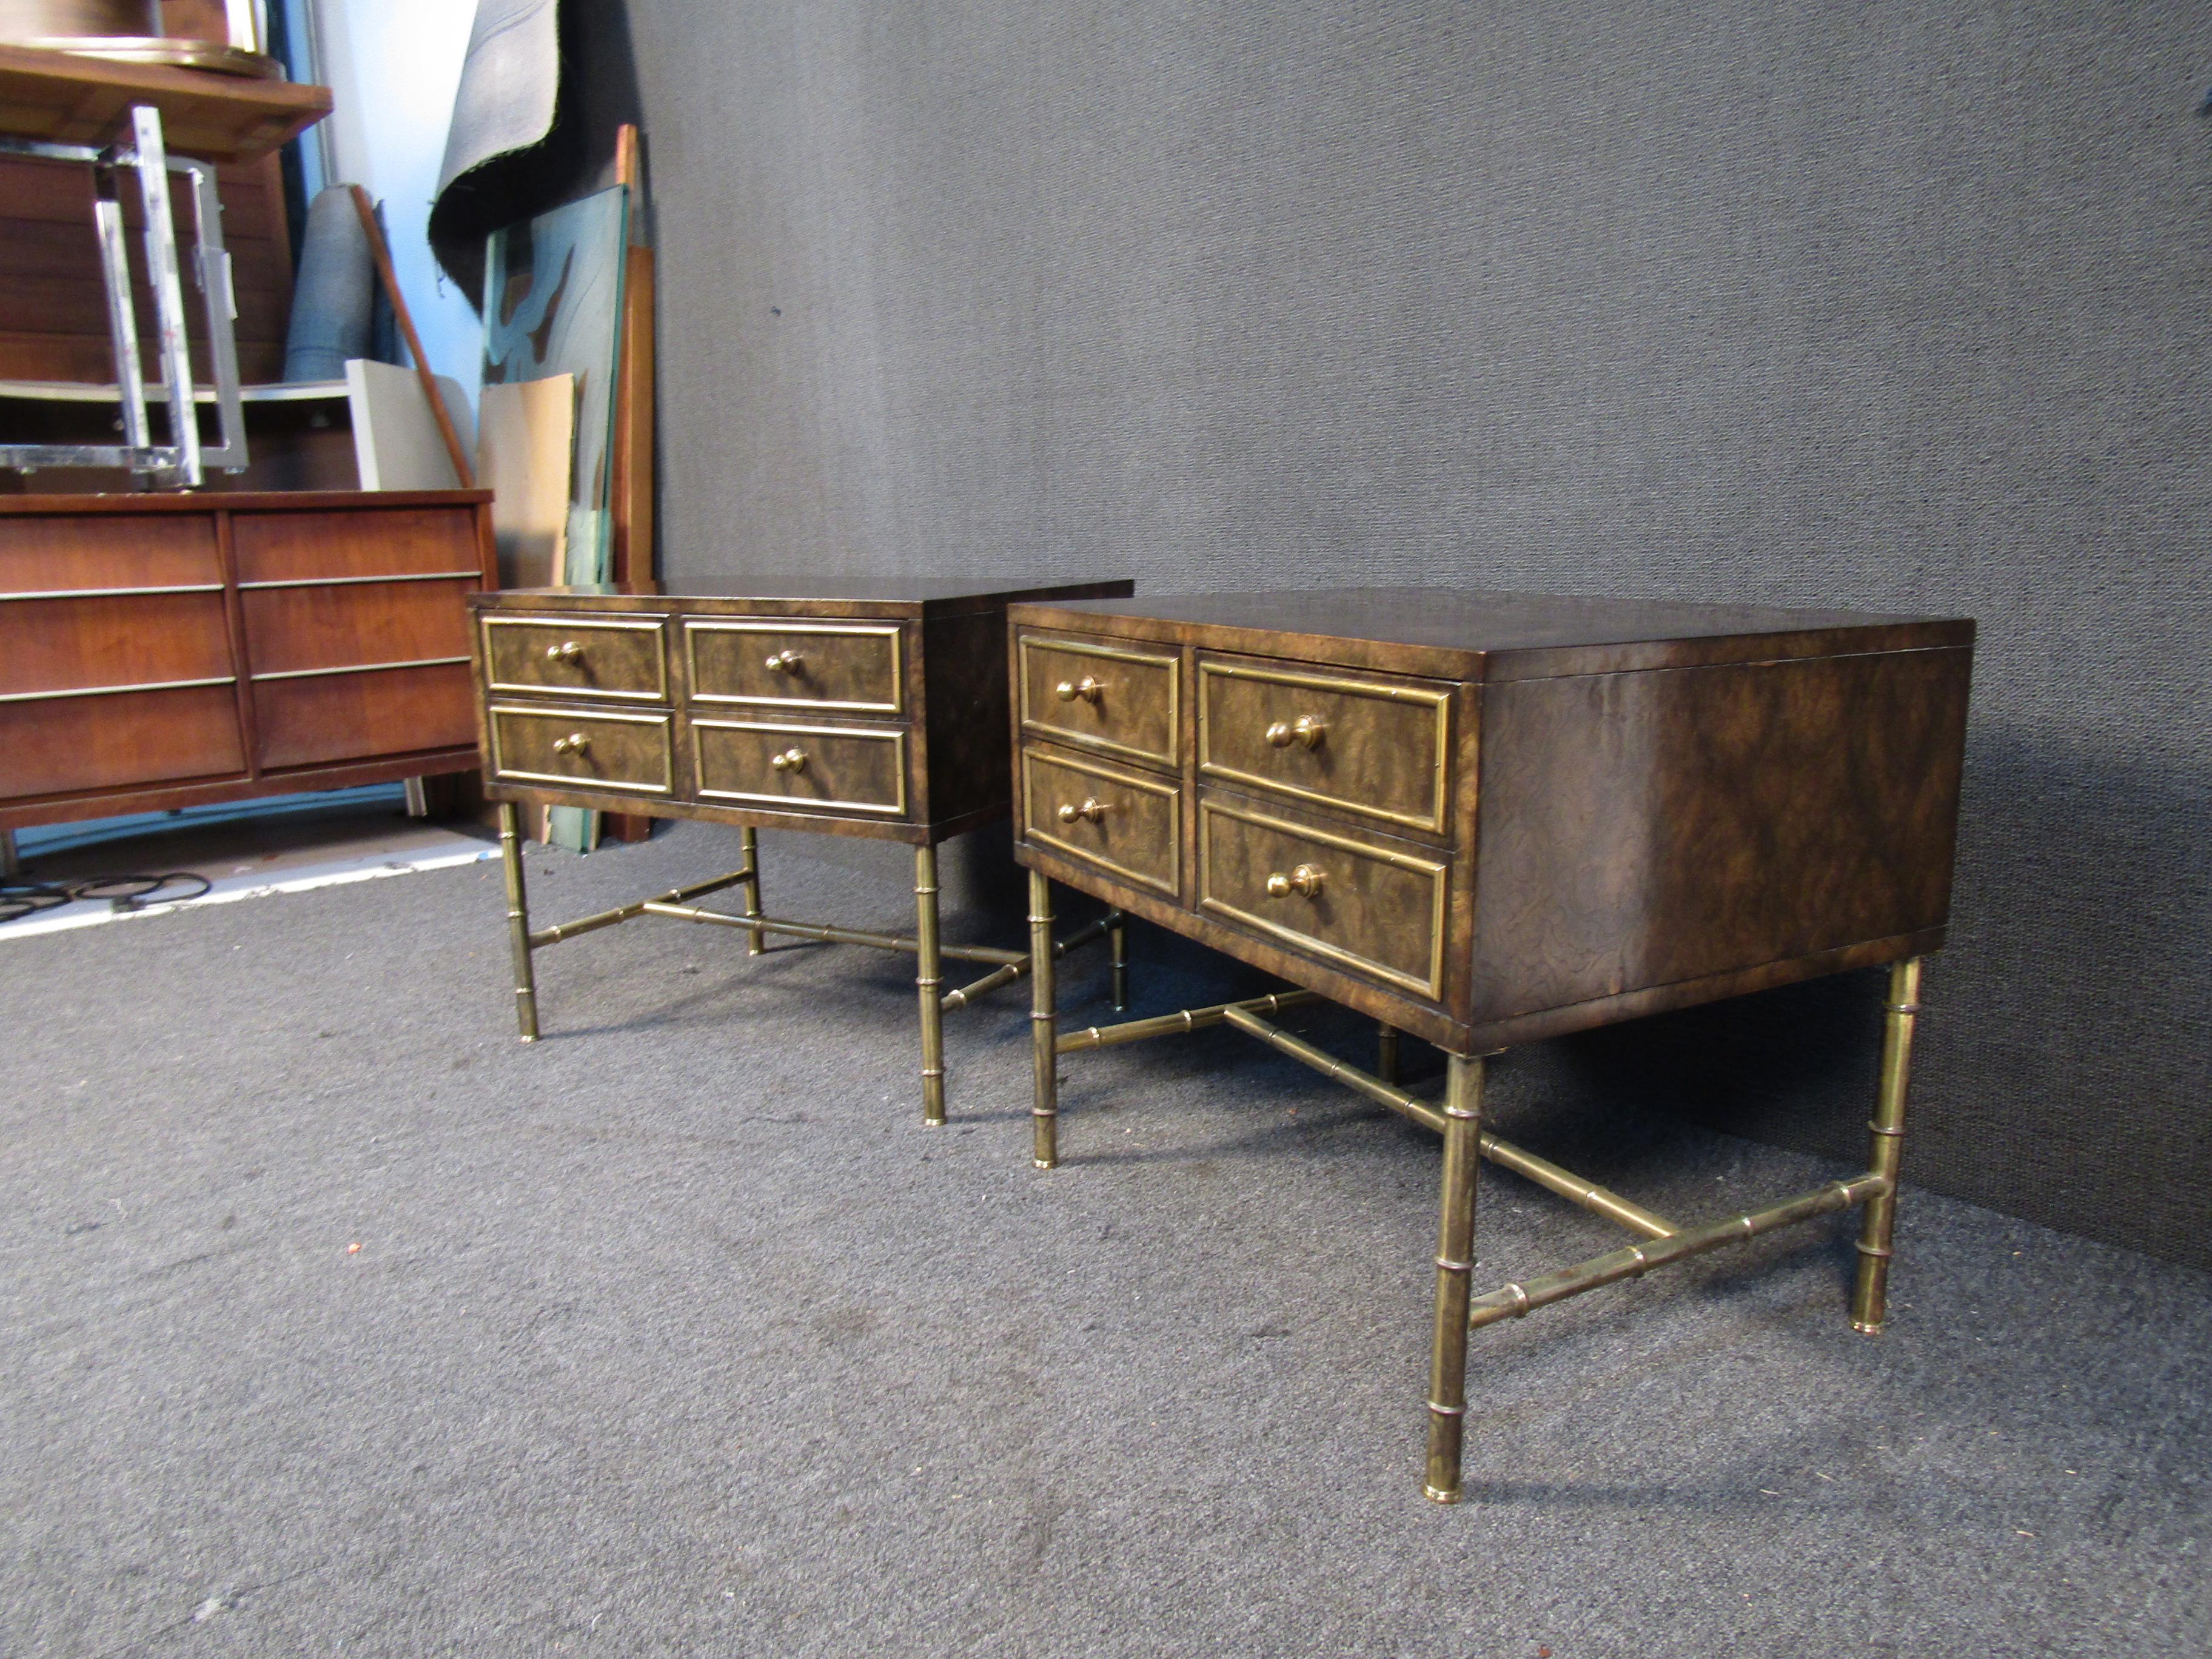 A vintage pair of night stands by Mastercraft that pair dark burl wood with brass accents for a bold and elegant look. Large drawers and quality mid-century craftsmanship make these a great investment in any bedroom. Please confirm item location